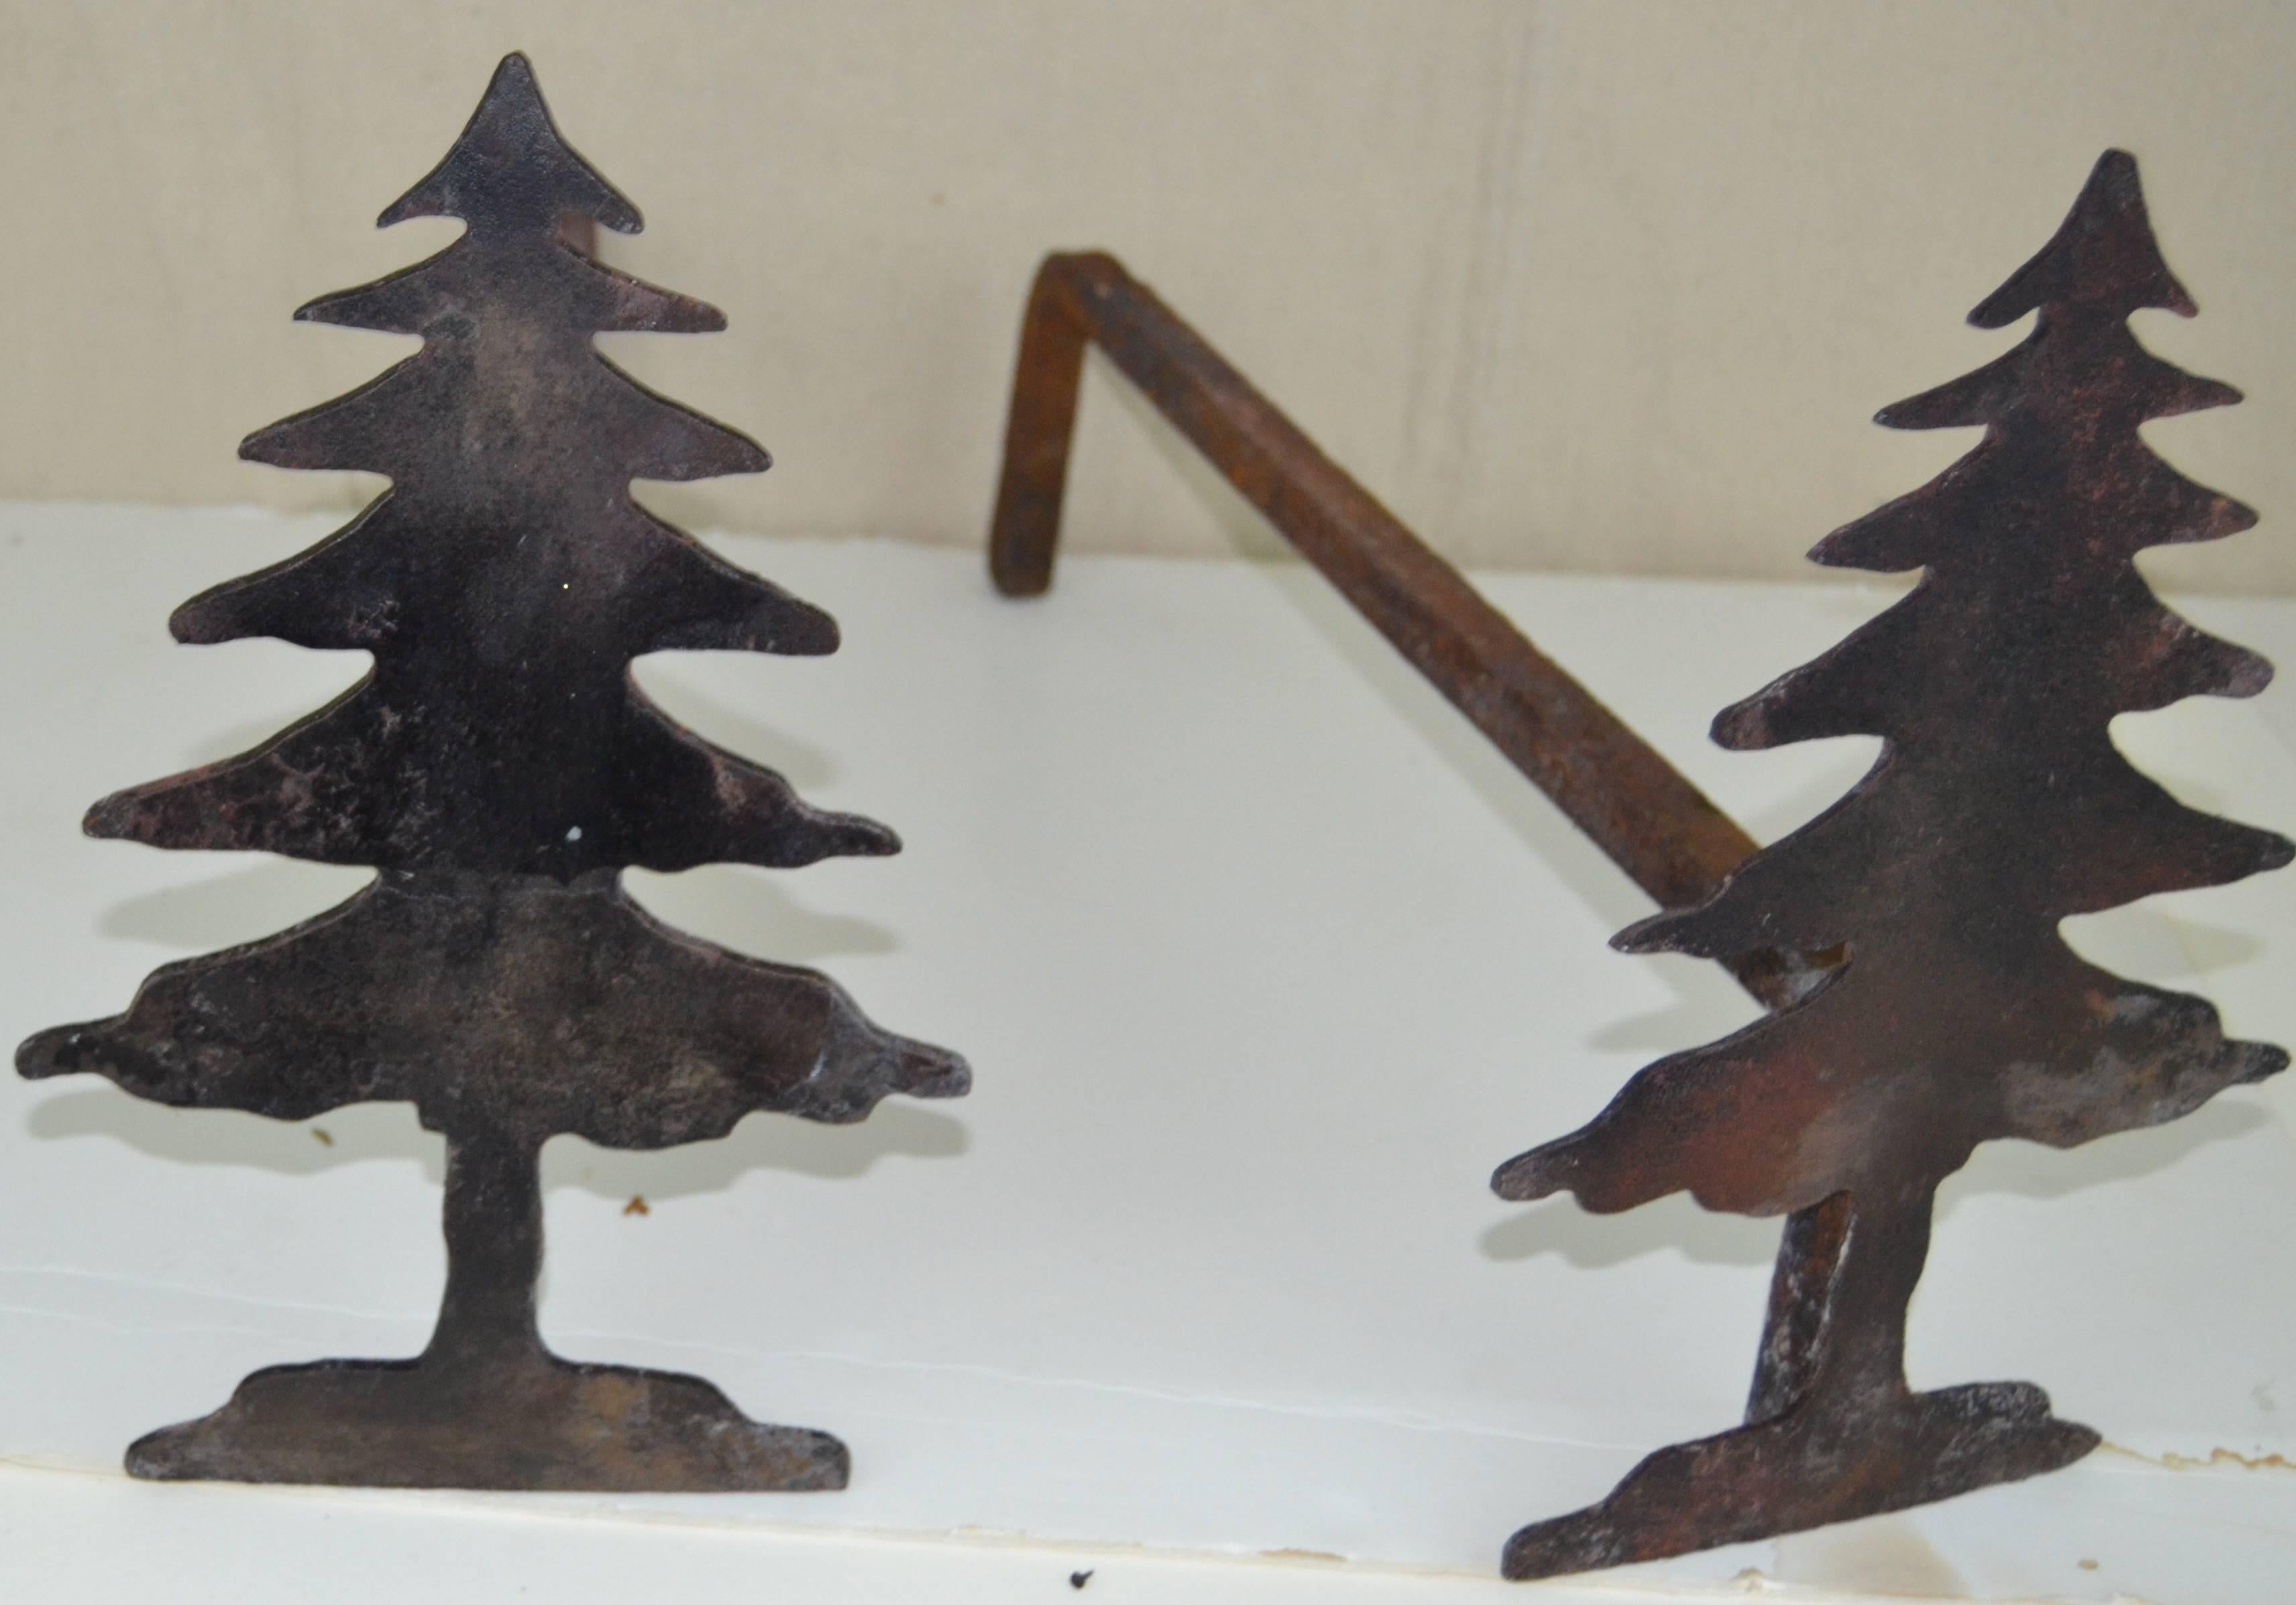 Fun and whimsical pair of pine tree andirons, small size with worn used surface.